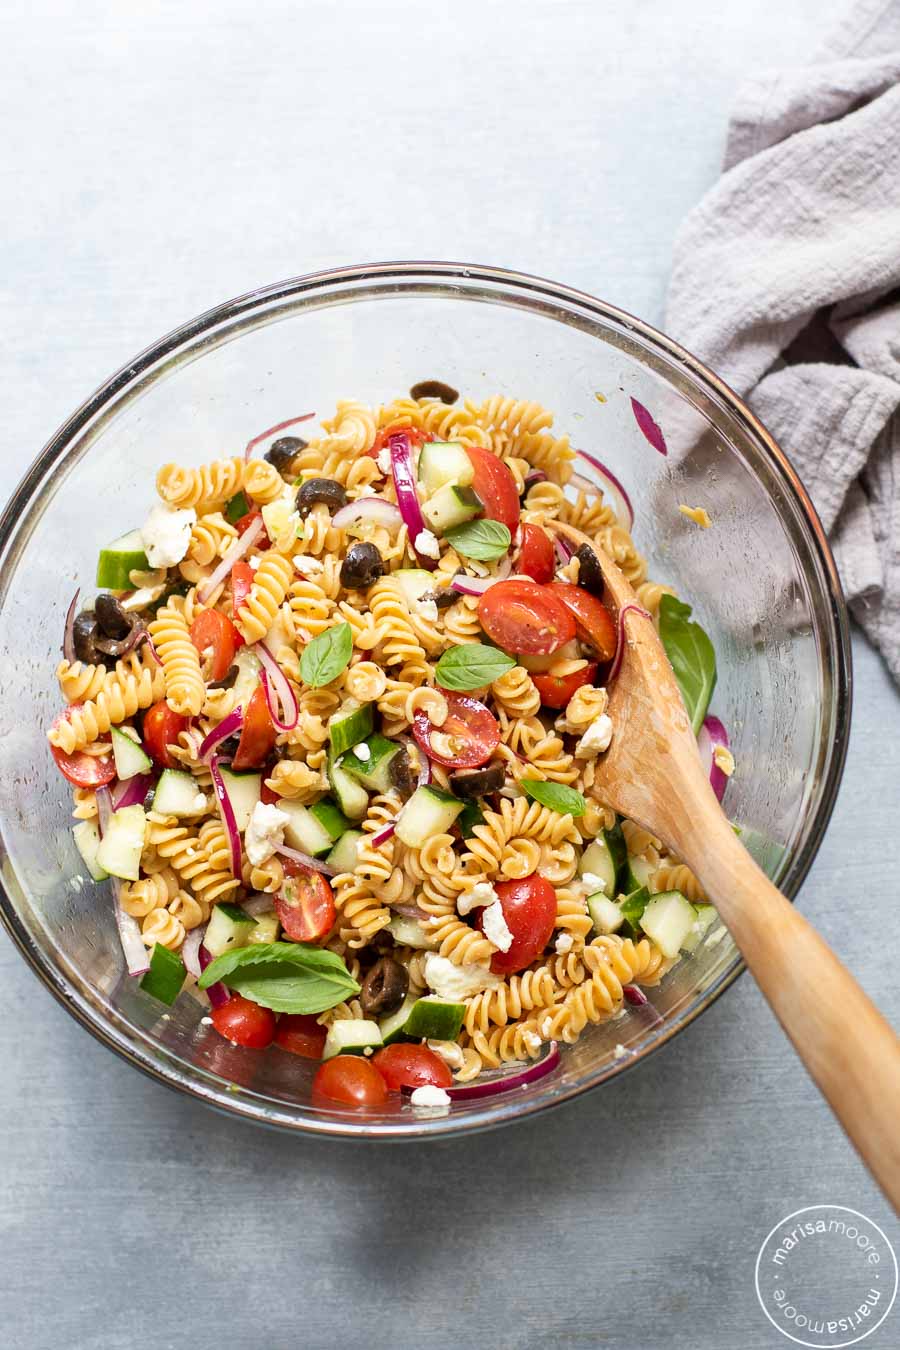 Chickpea Pasta Salad in Bowl with Wooden Spoon